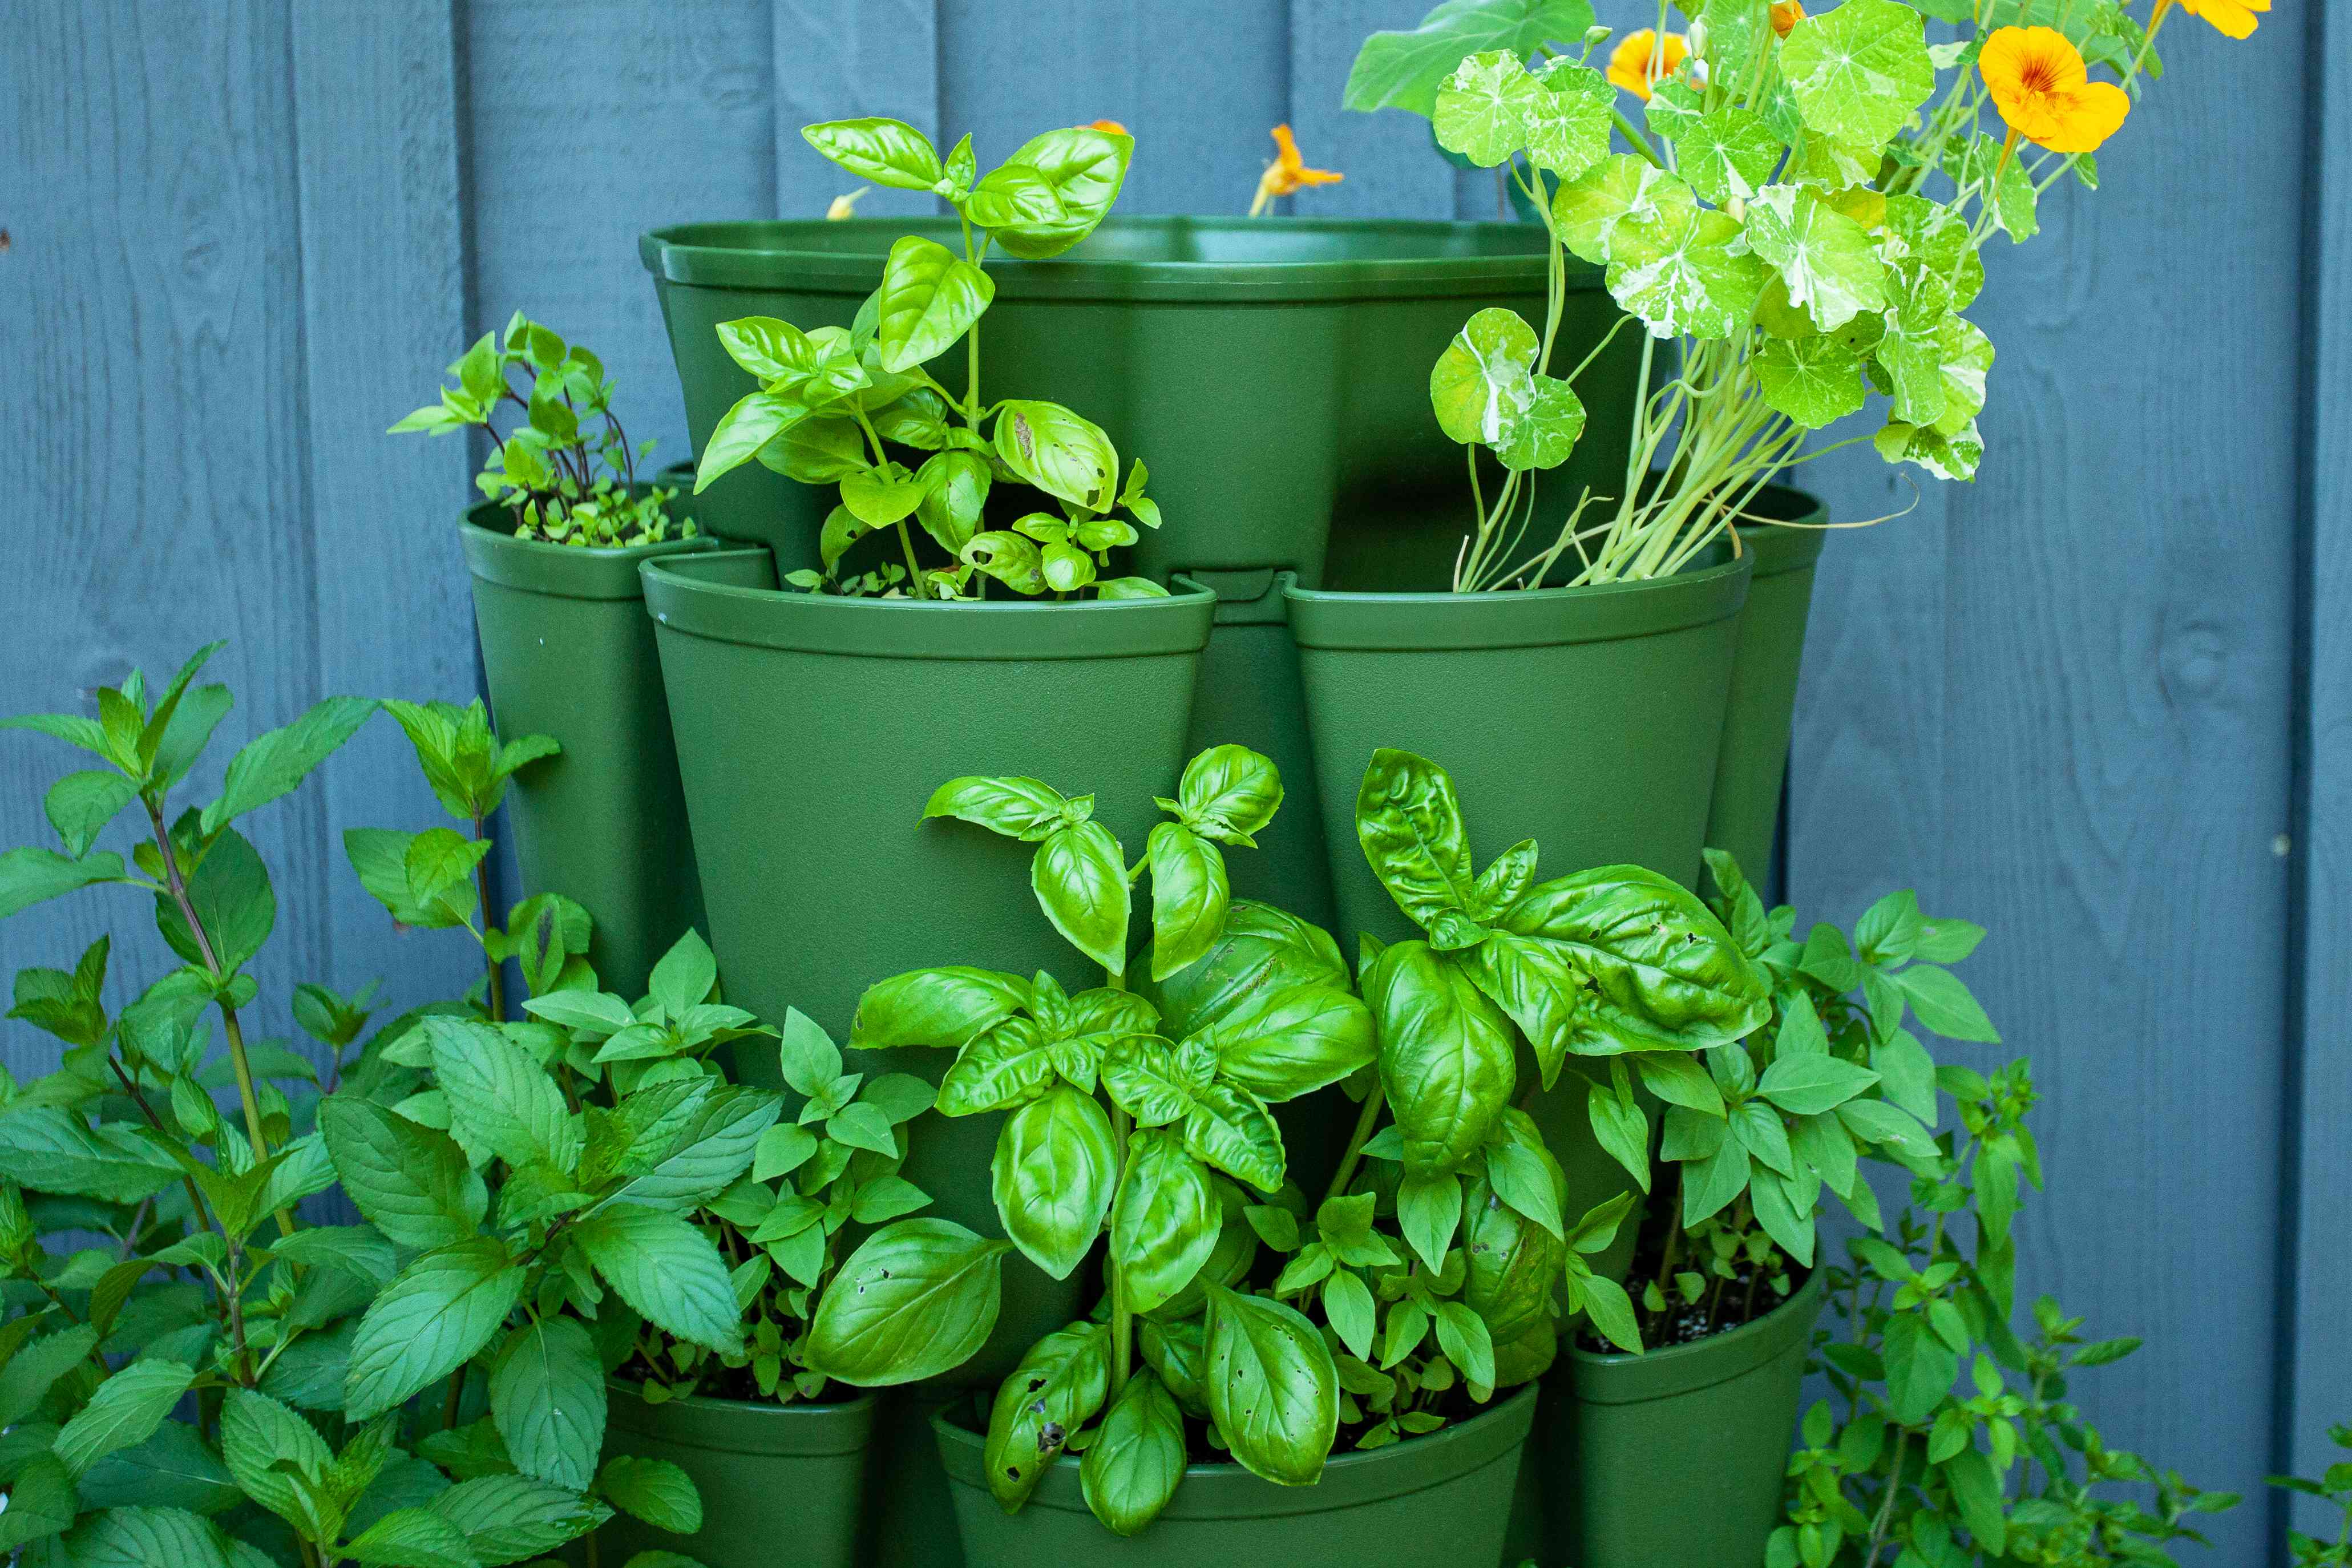 4 Herbs You Should Always Plant Side-By-Side